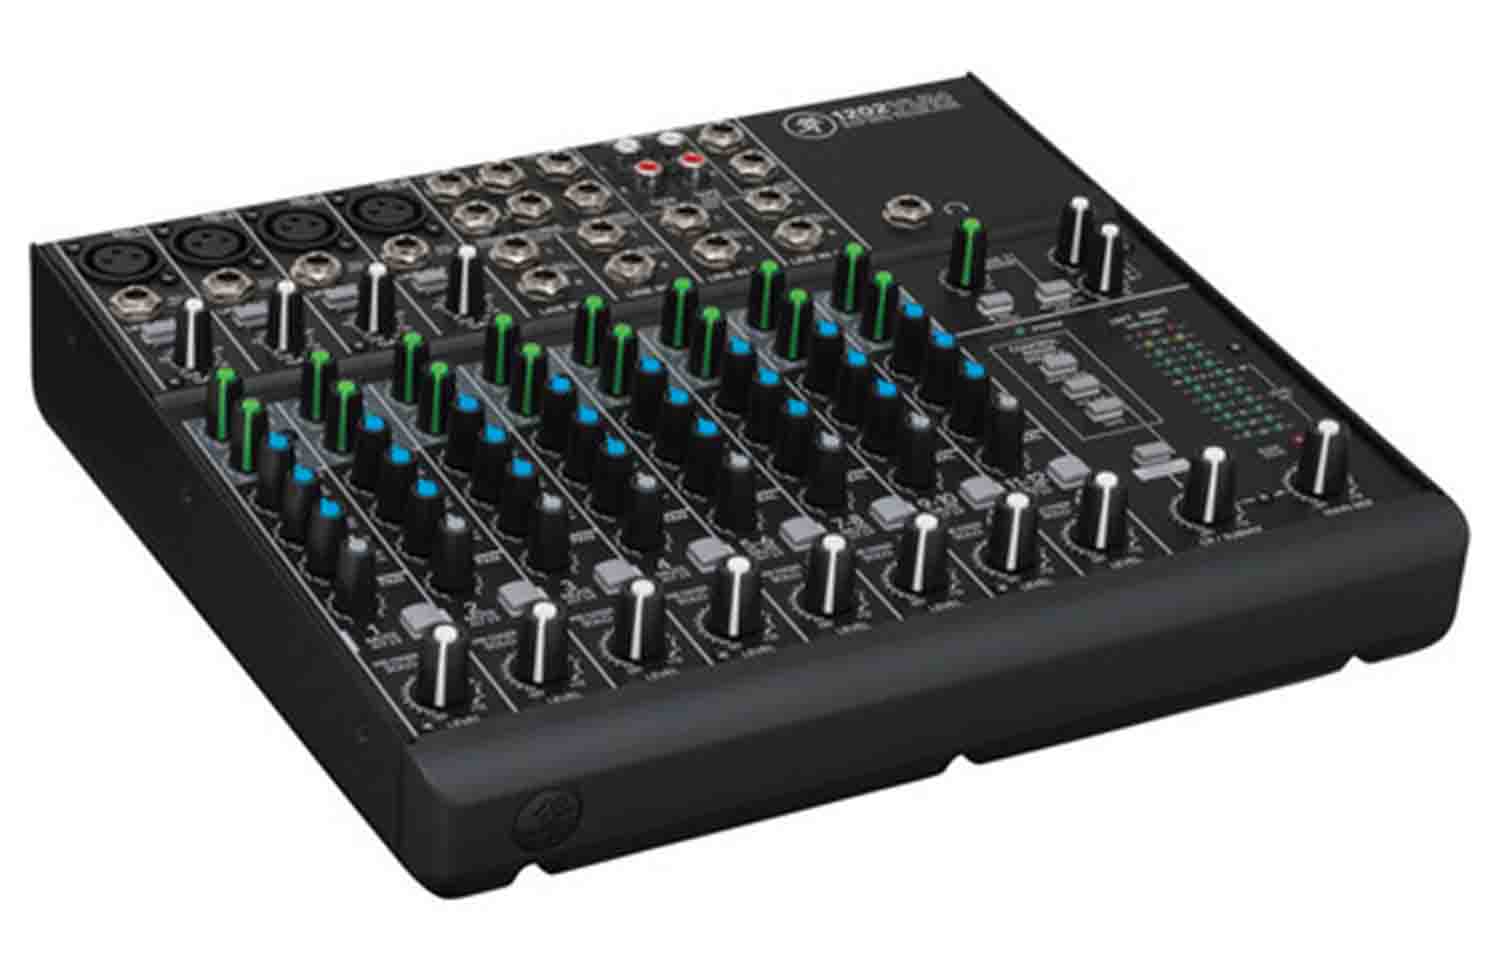 B-Stock: Mackie 1202VLZ4 12 Channel Compact Mixer by Mackie